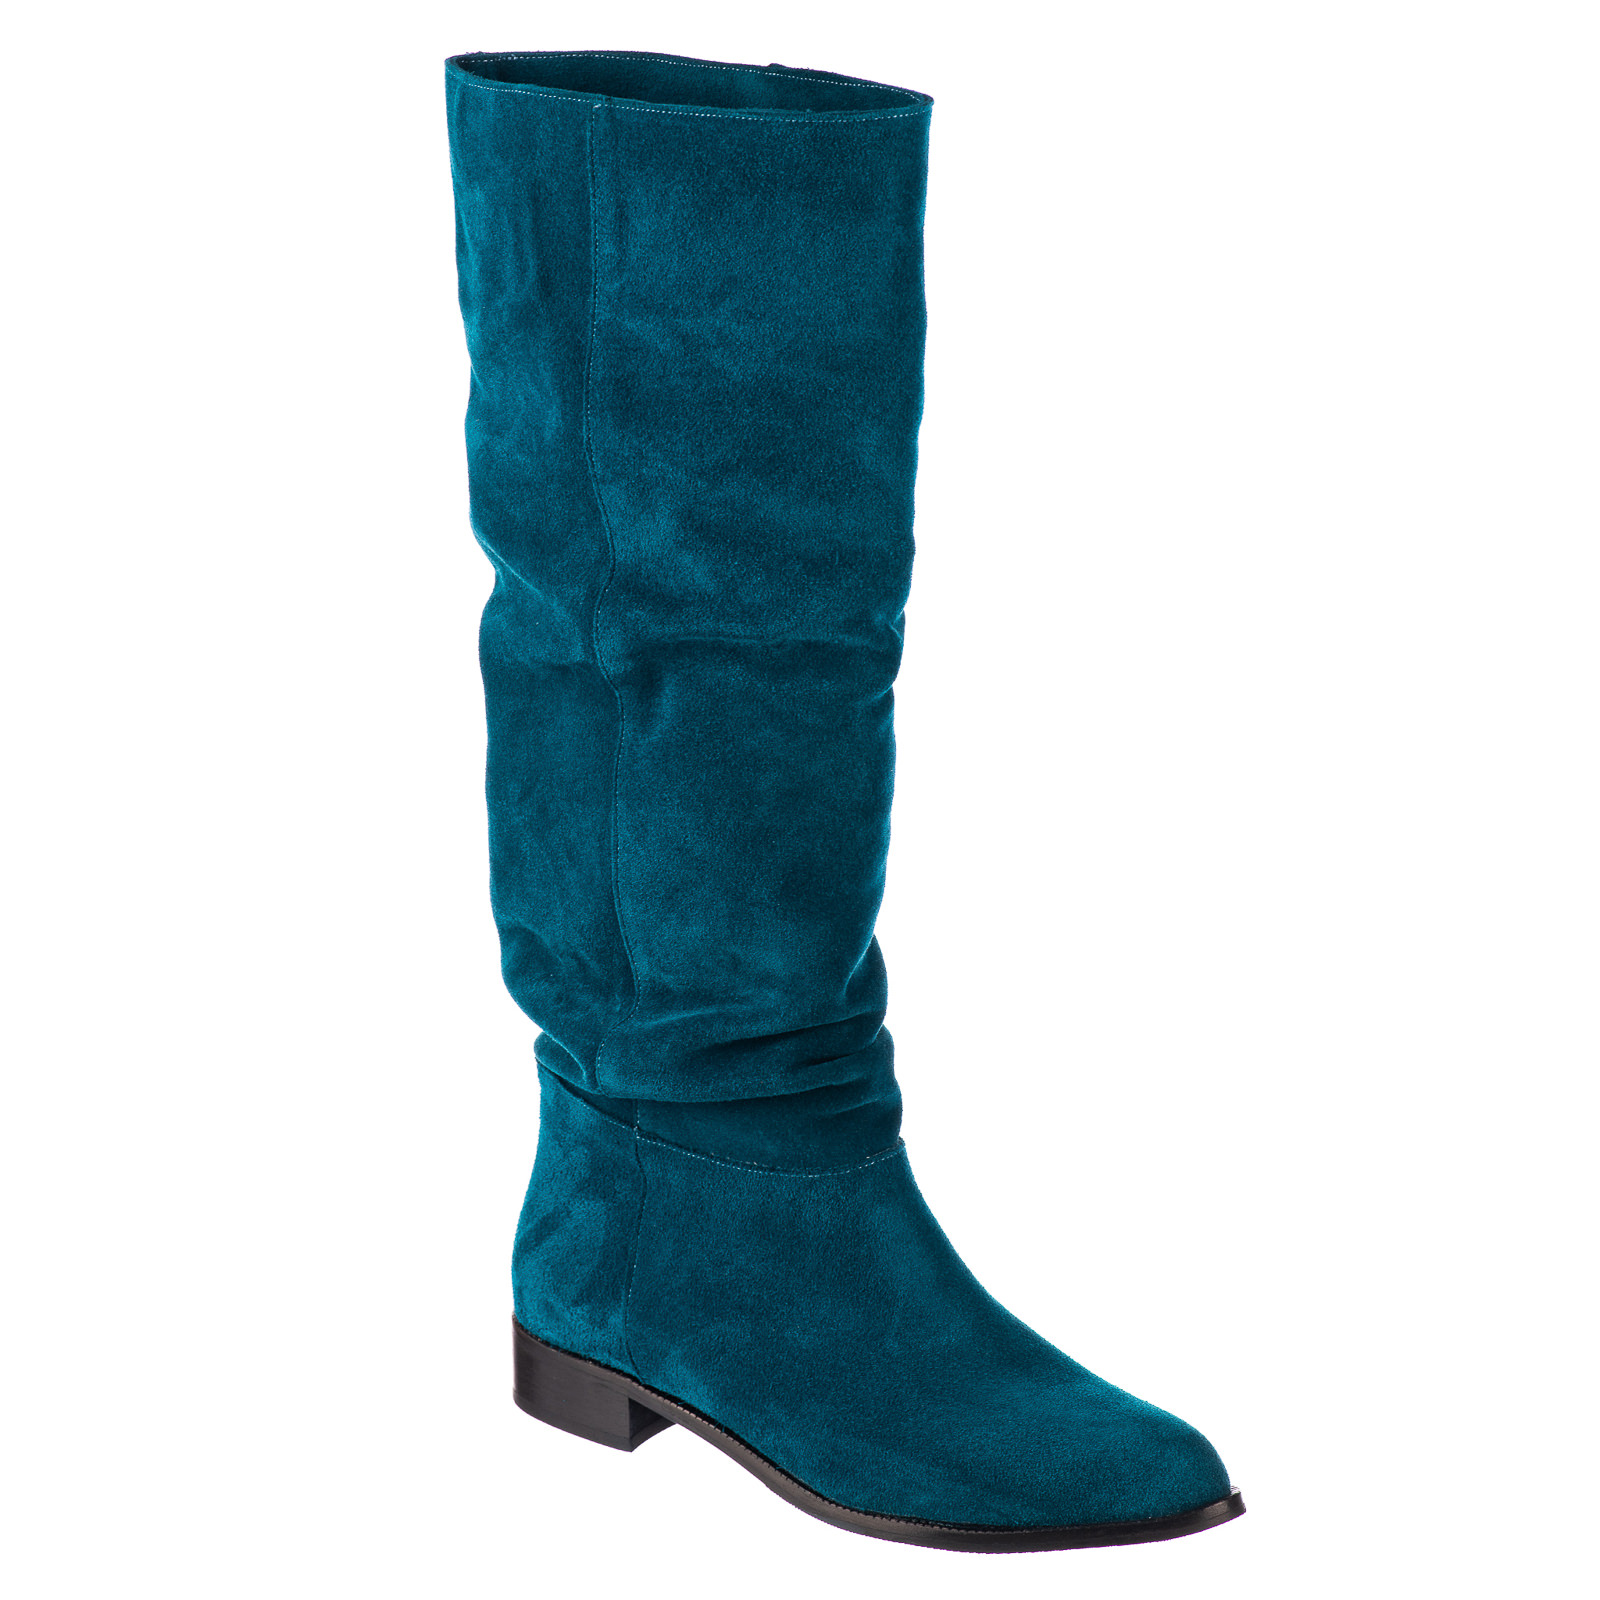 Leather boots B736 - BLUE